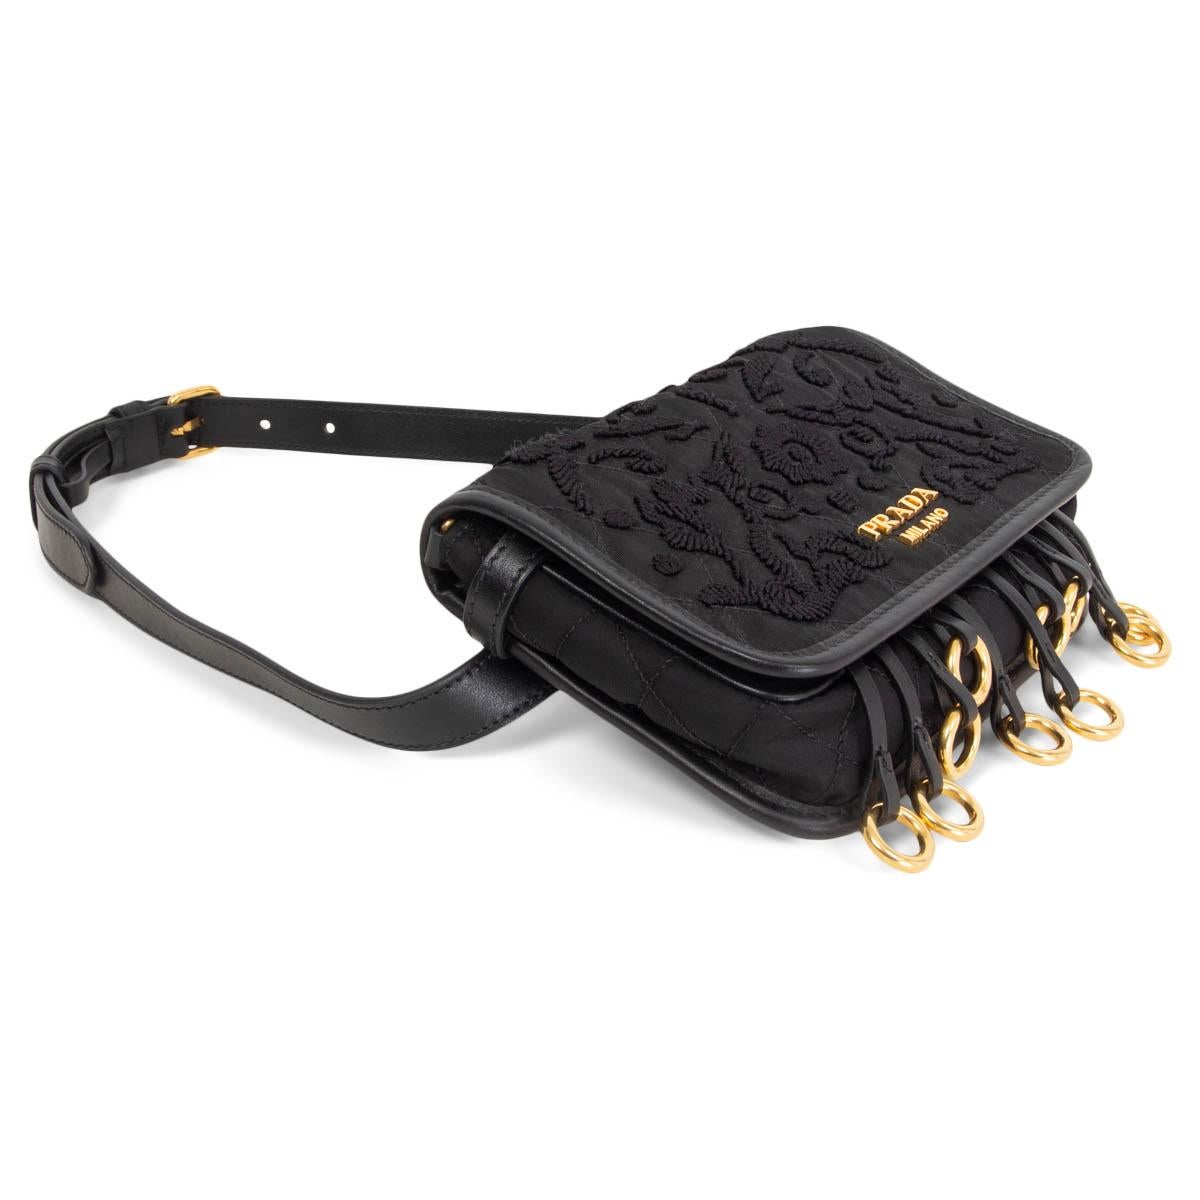 100% authentic Prada floral-embroidered Corsaire belt beg in black nylon with gold-tone metal O-ring fringe and calfskin trim. Removable and adjustable belt. Opens with a magnetic snap-flap closure to a black nylon logo lining with one slip pocket